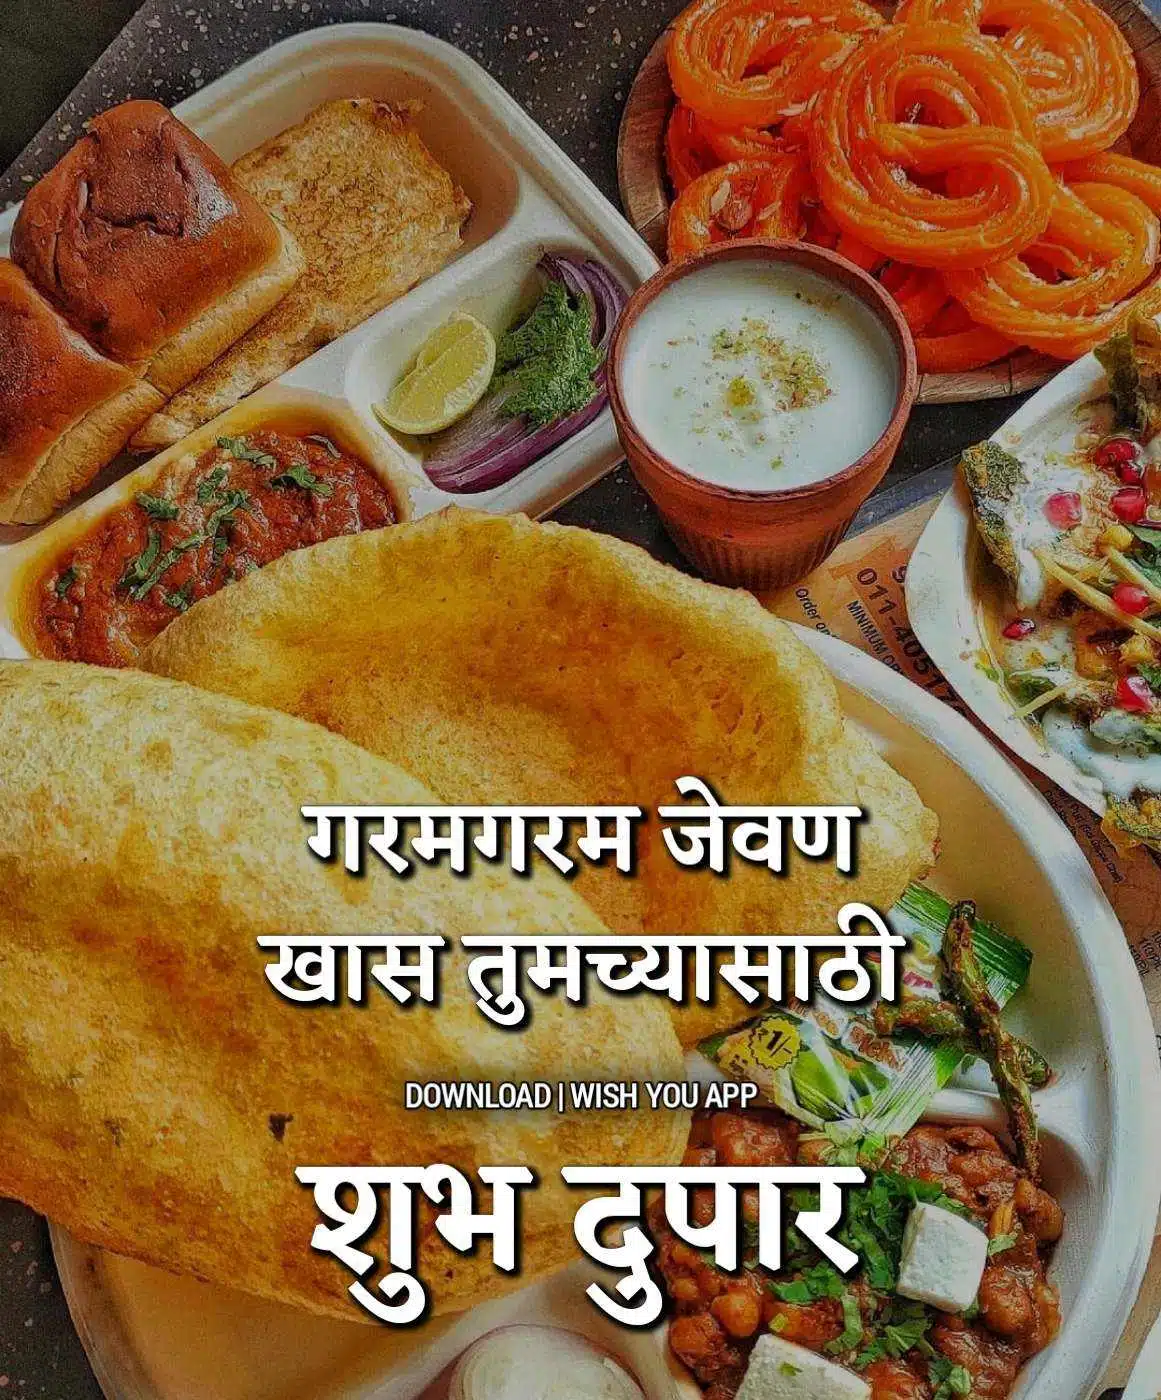 Lunch Good Afternoon In Marathi (20)